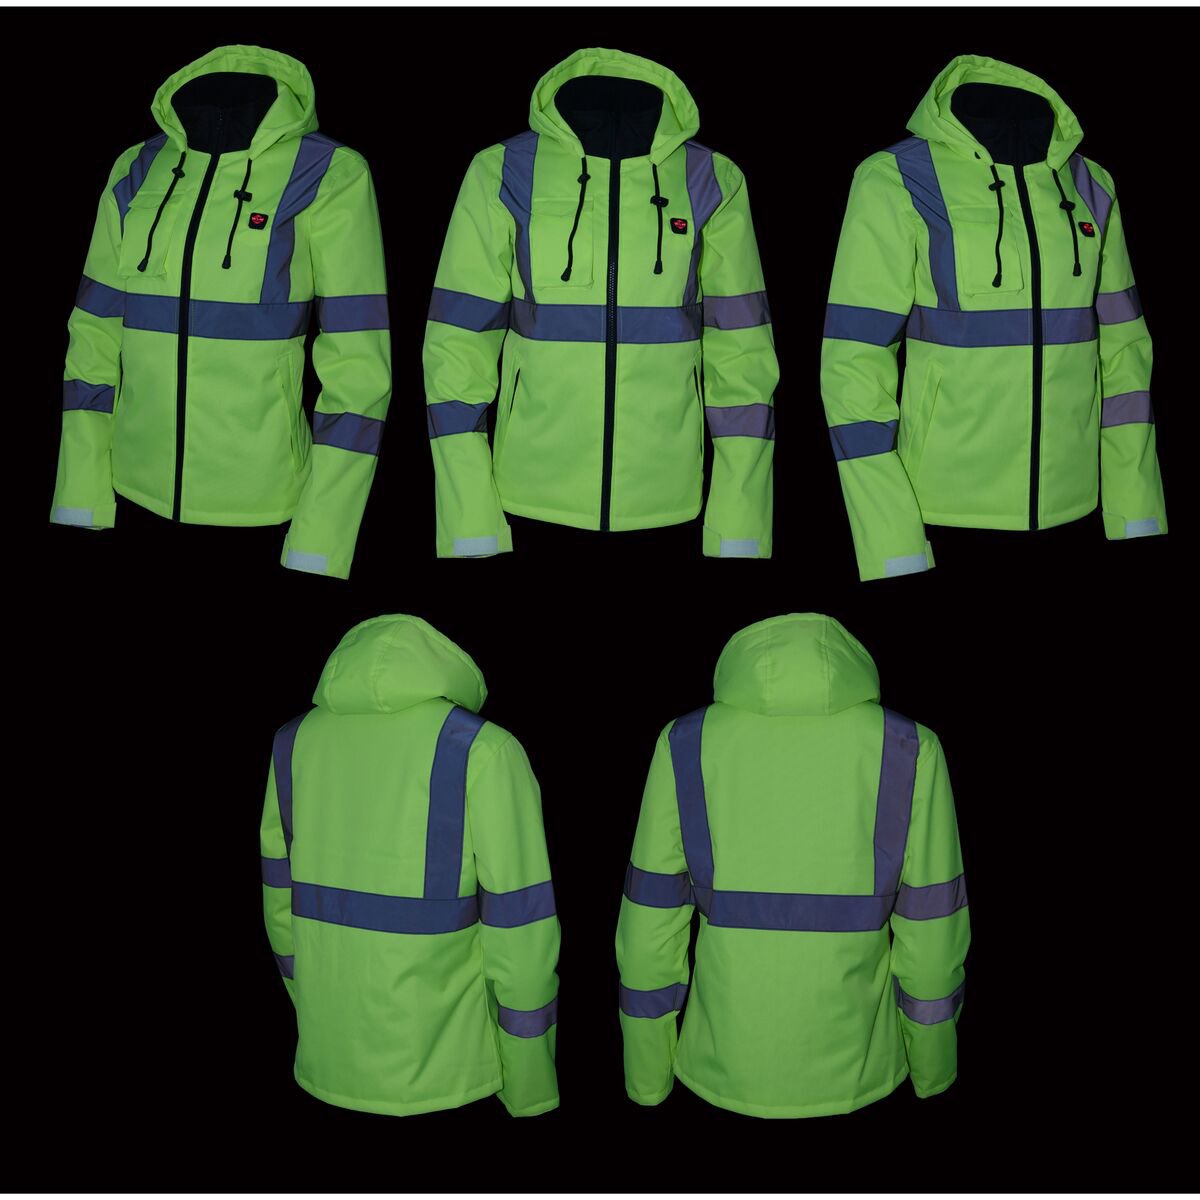 Milwaukee Leather MPL2773SET Women's High-Viz 'Heated' Textile Jacket (Battery Pack Included)